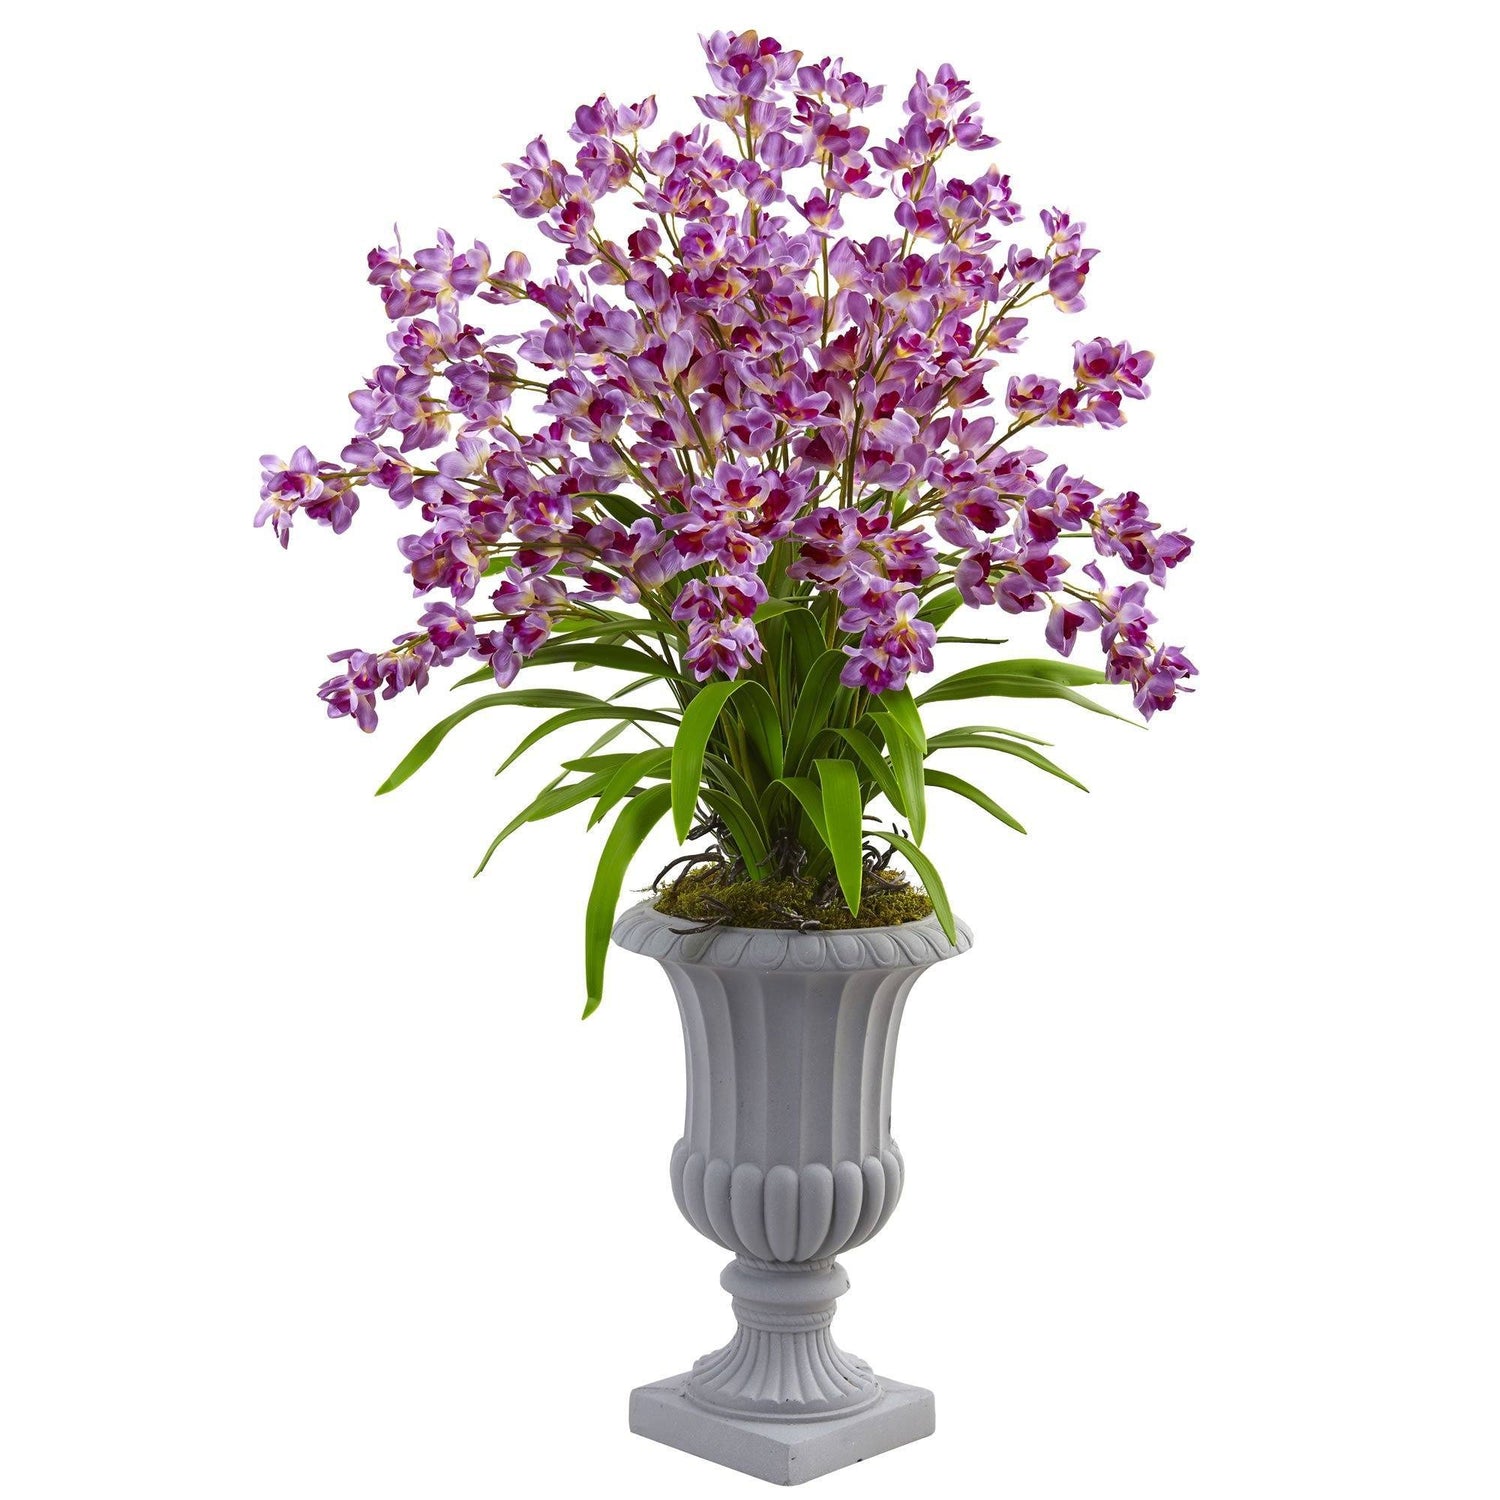 Giant Blooming Orchid Arrangement with Urn